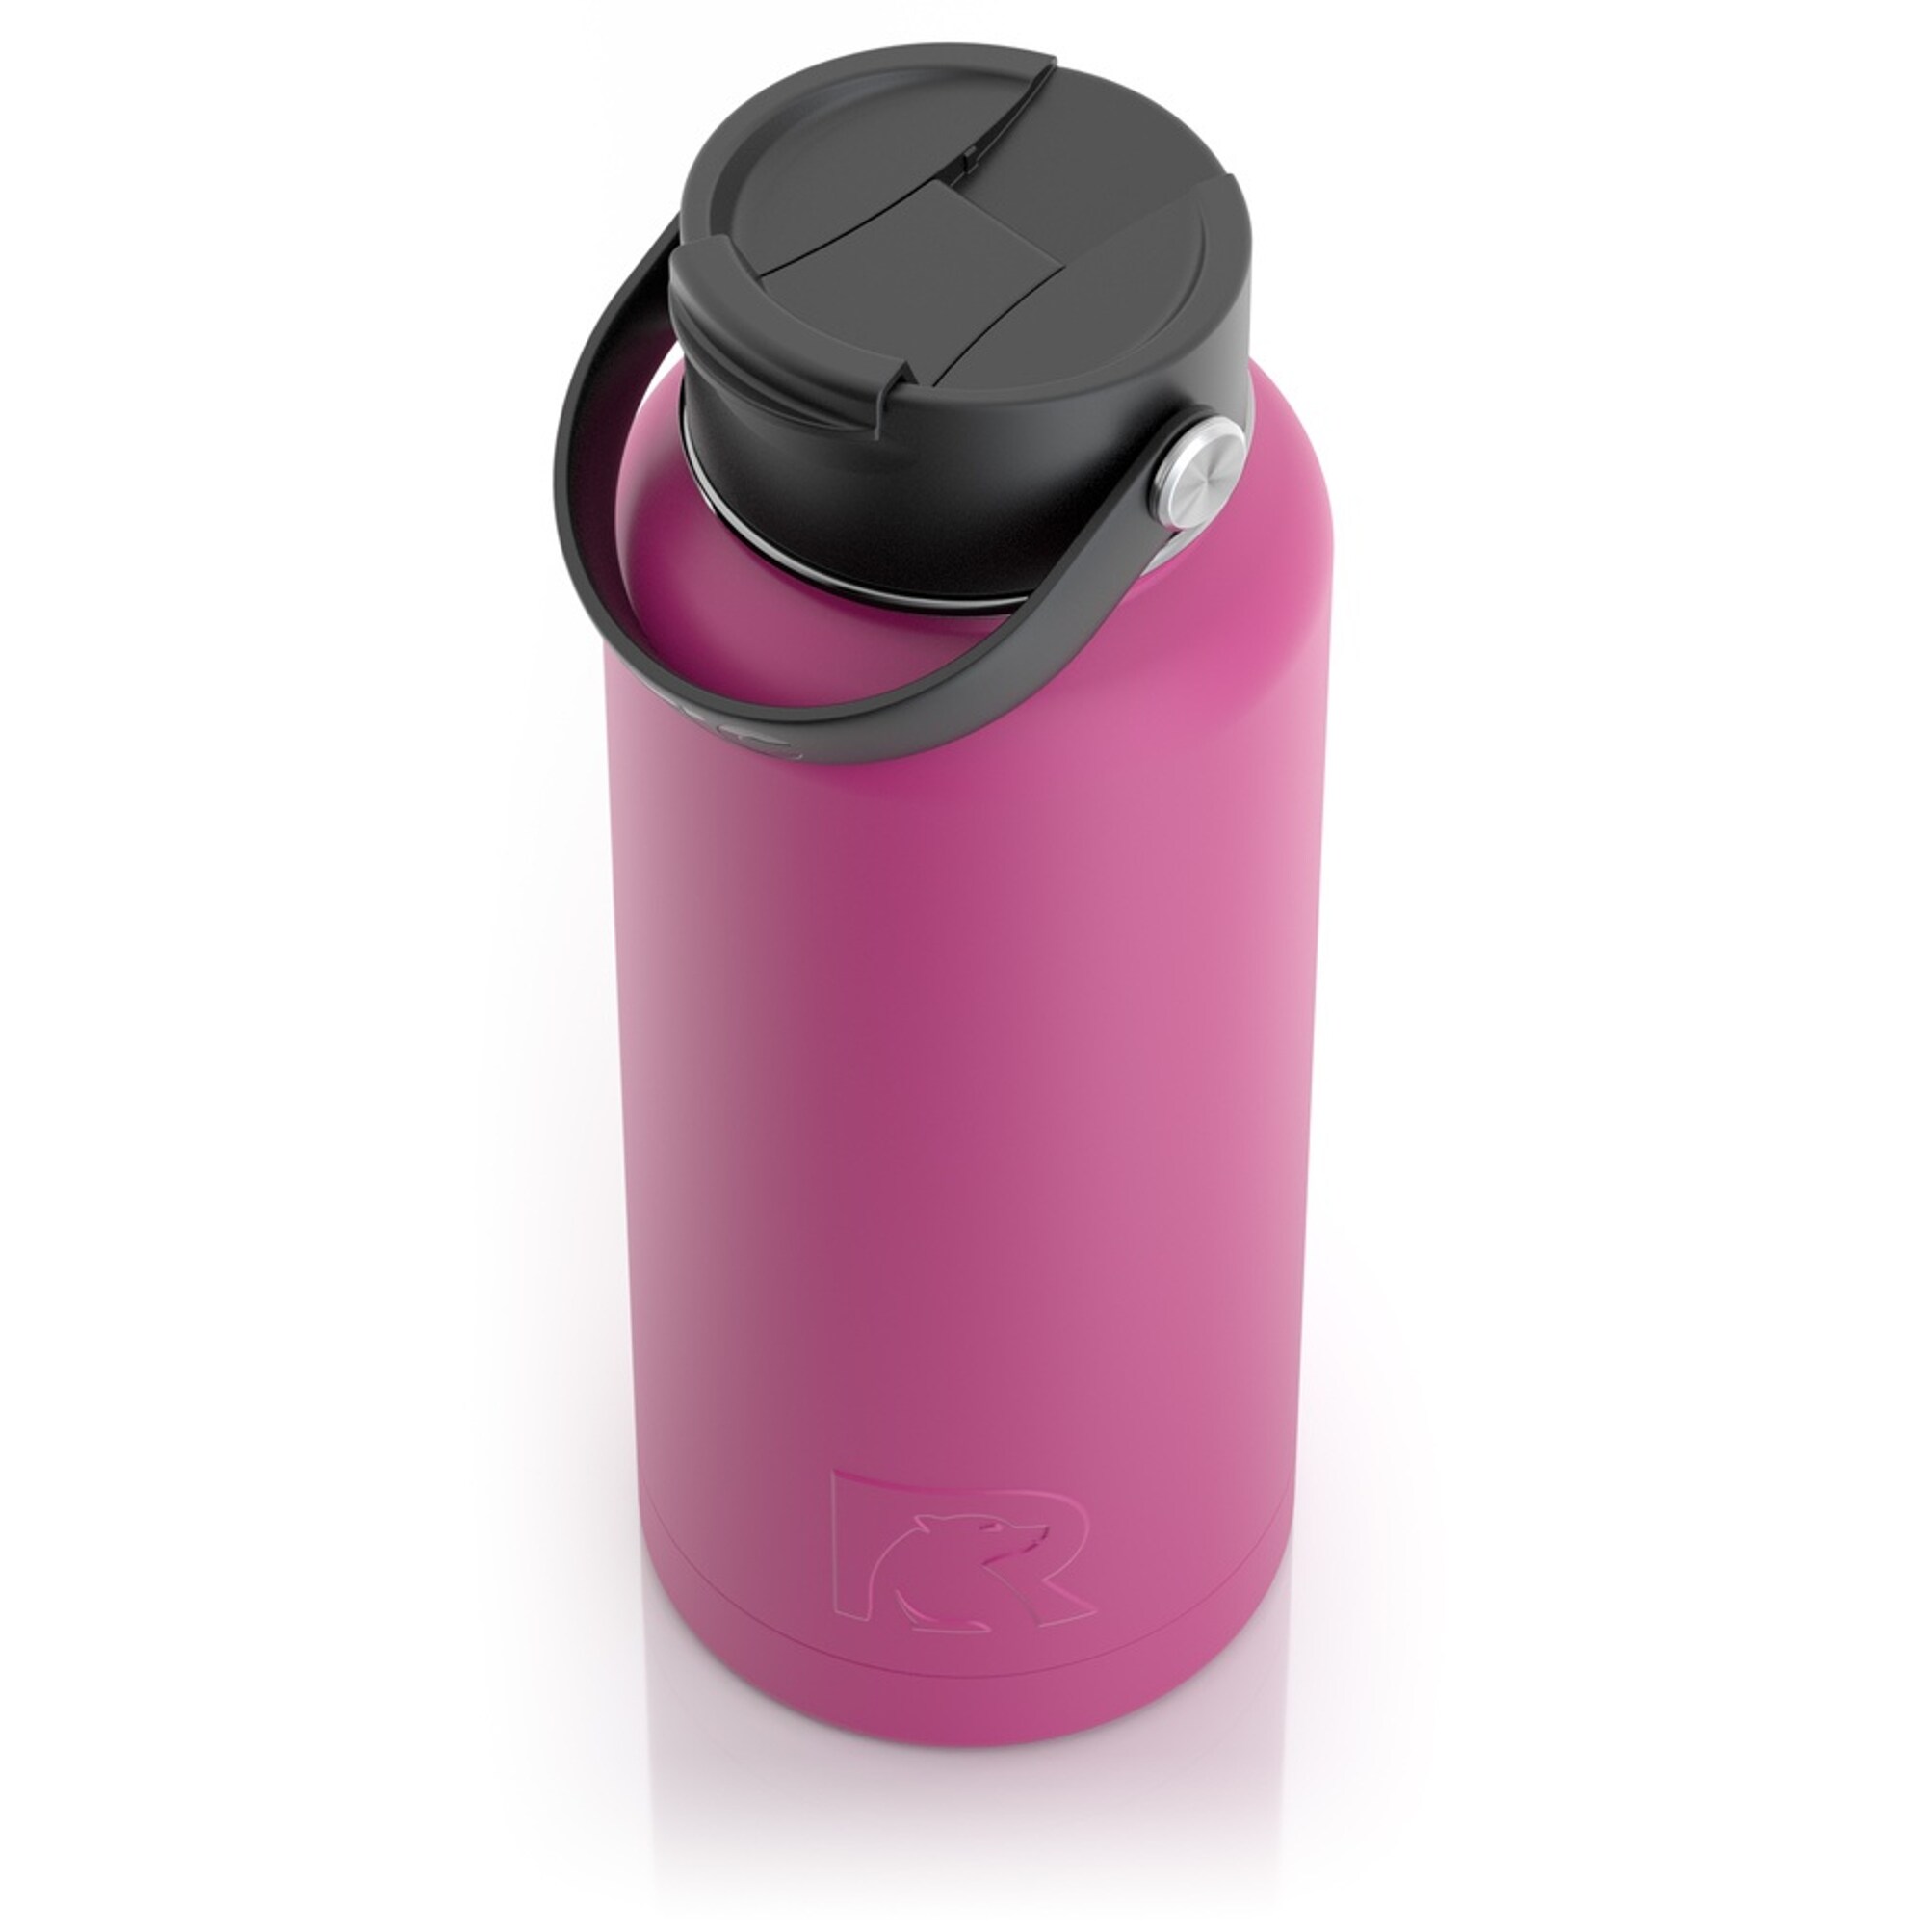 RTIC Outdoors 20-fl oz Stainless Steel Insulated Water Bottle | 13501